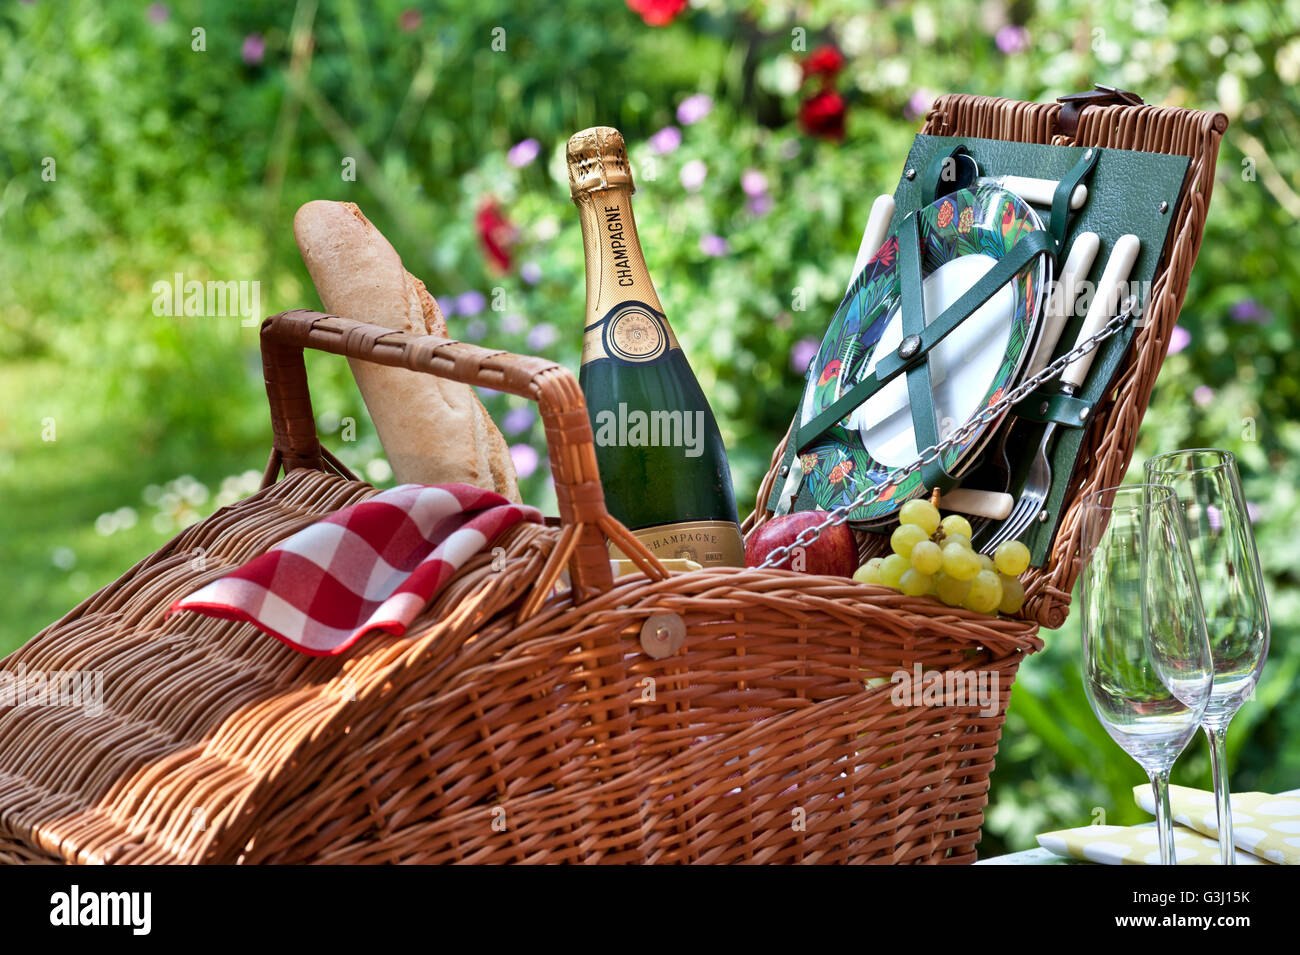 Picnic French champagne bottle baguette grapes and wicker picnic basket in  sunny floral luxury alfresco garden outdoor situation Stock Photo - Alamy